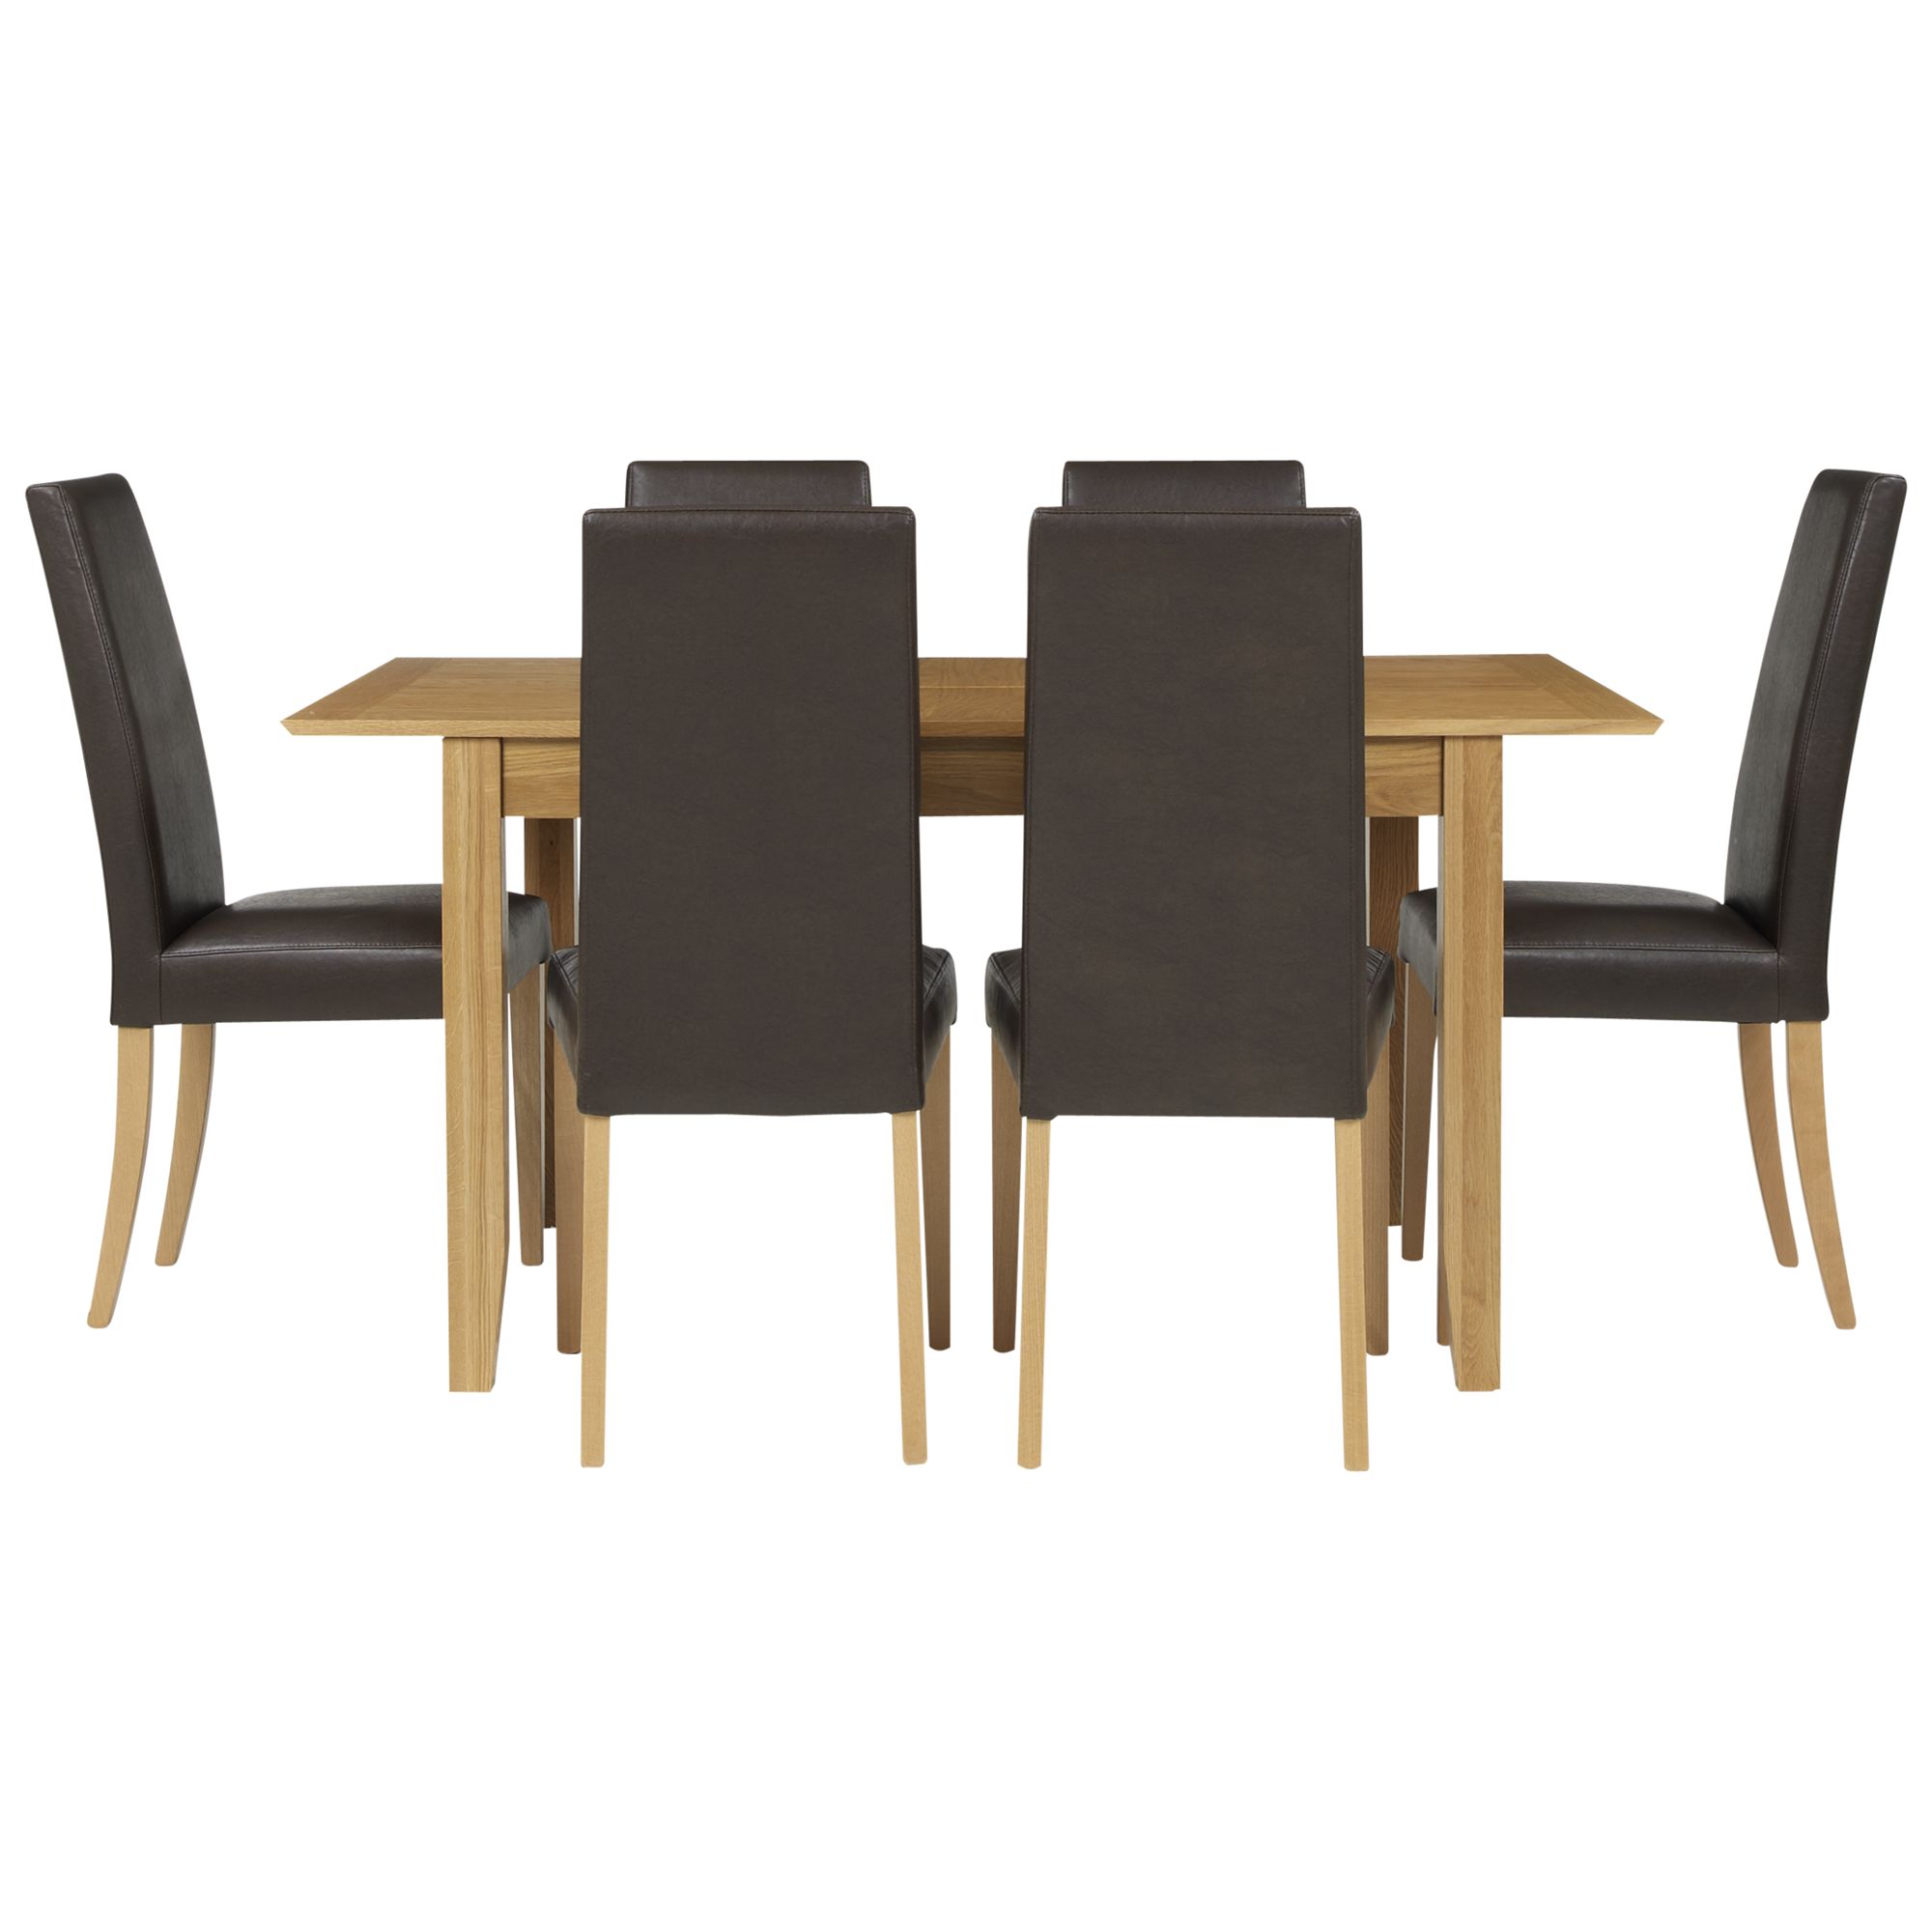 John Lewis Ellis Light Oak Extending Dining Table and 6 Lydia Chairs, Chocolate, width 46cm